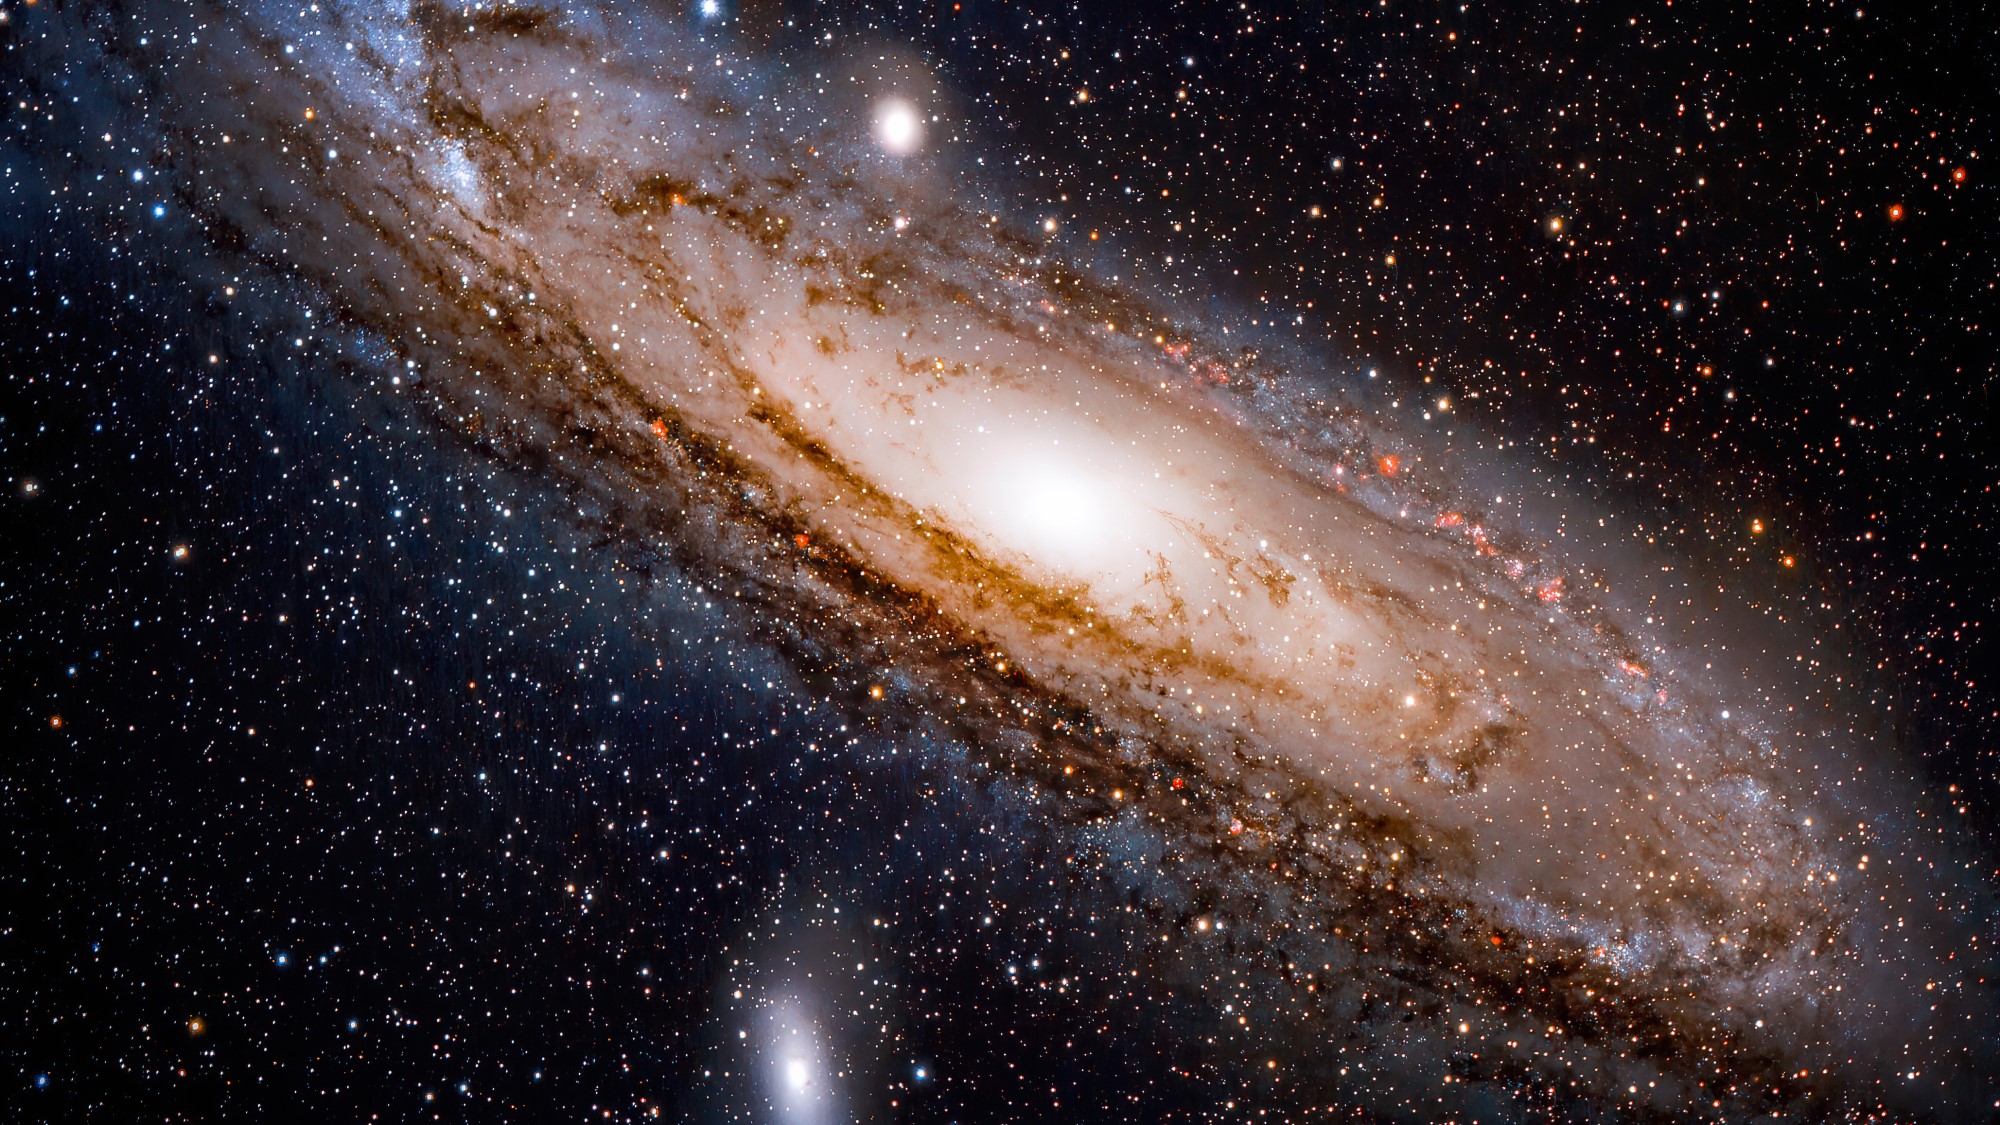 Galactic cannibal Andromeda feasts on smaller galaxies, cosmic leftovers reveal